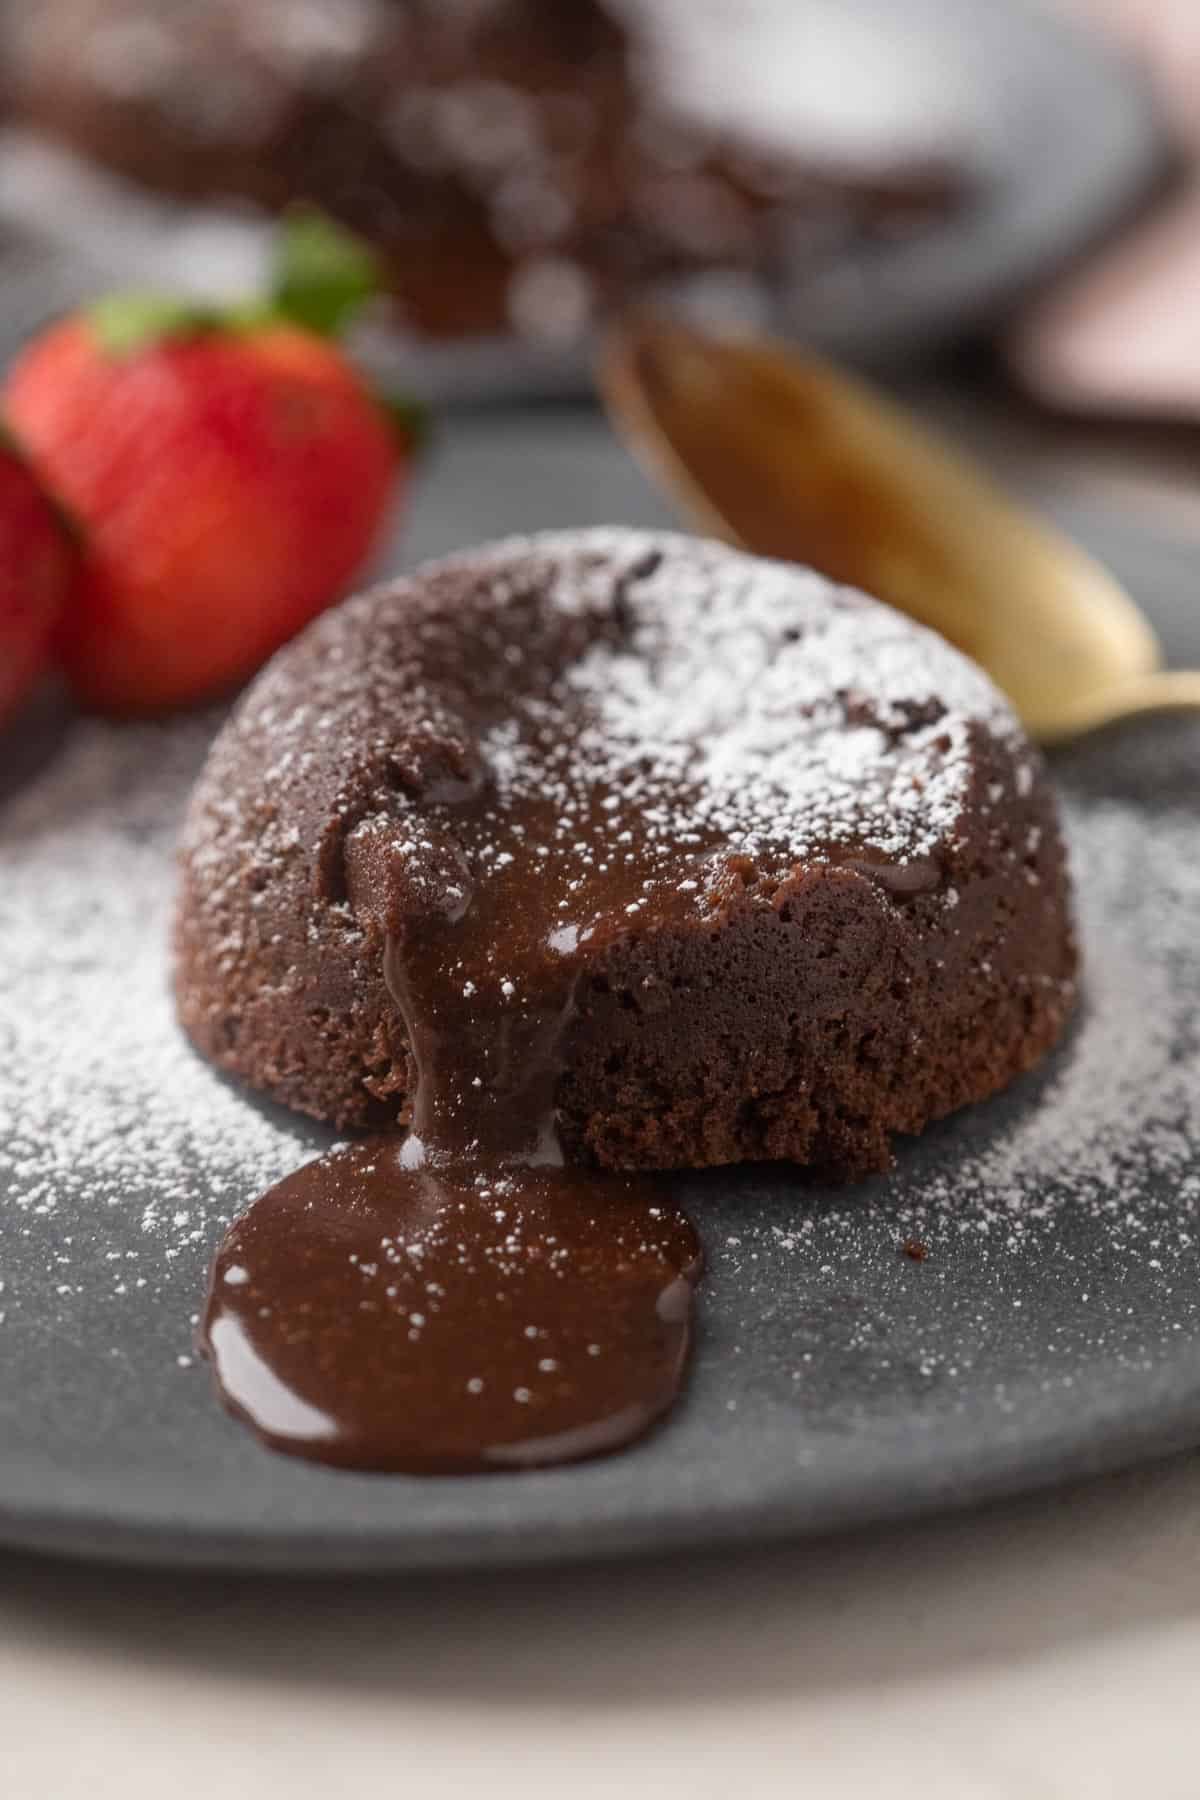 Picture of chocolate oozing out of mmocha lava cake with strawberries on the side